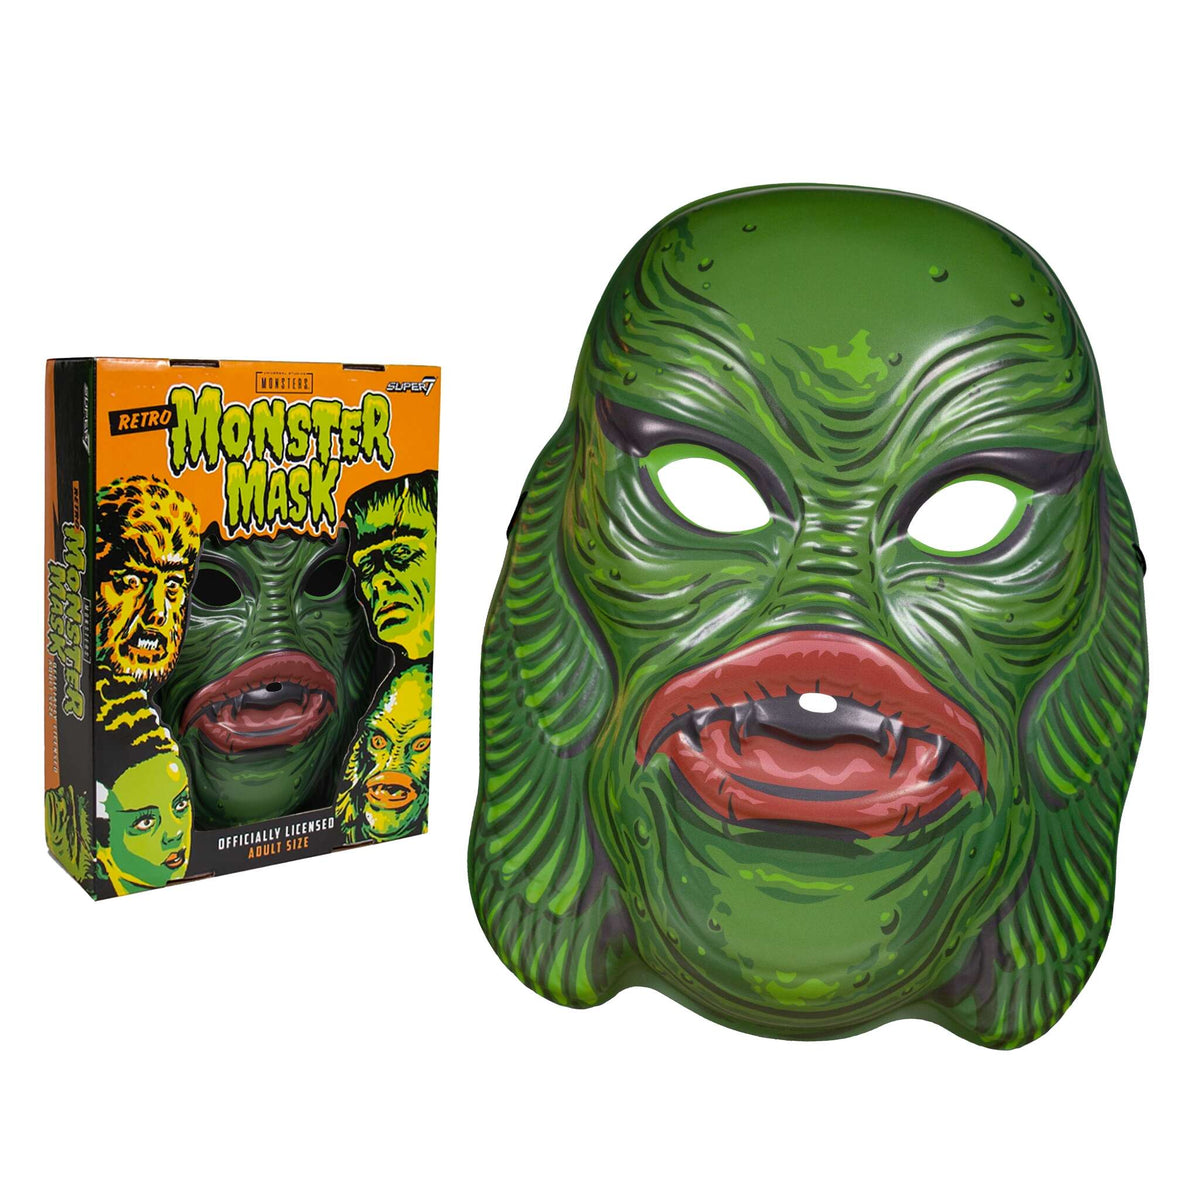 høj guld Stedord Universal Monsters Mask - Creature from the Black Lagoon (Dark Green) –  Super7